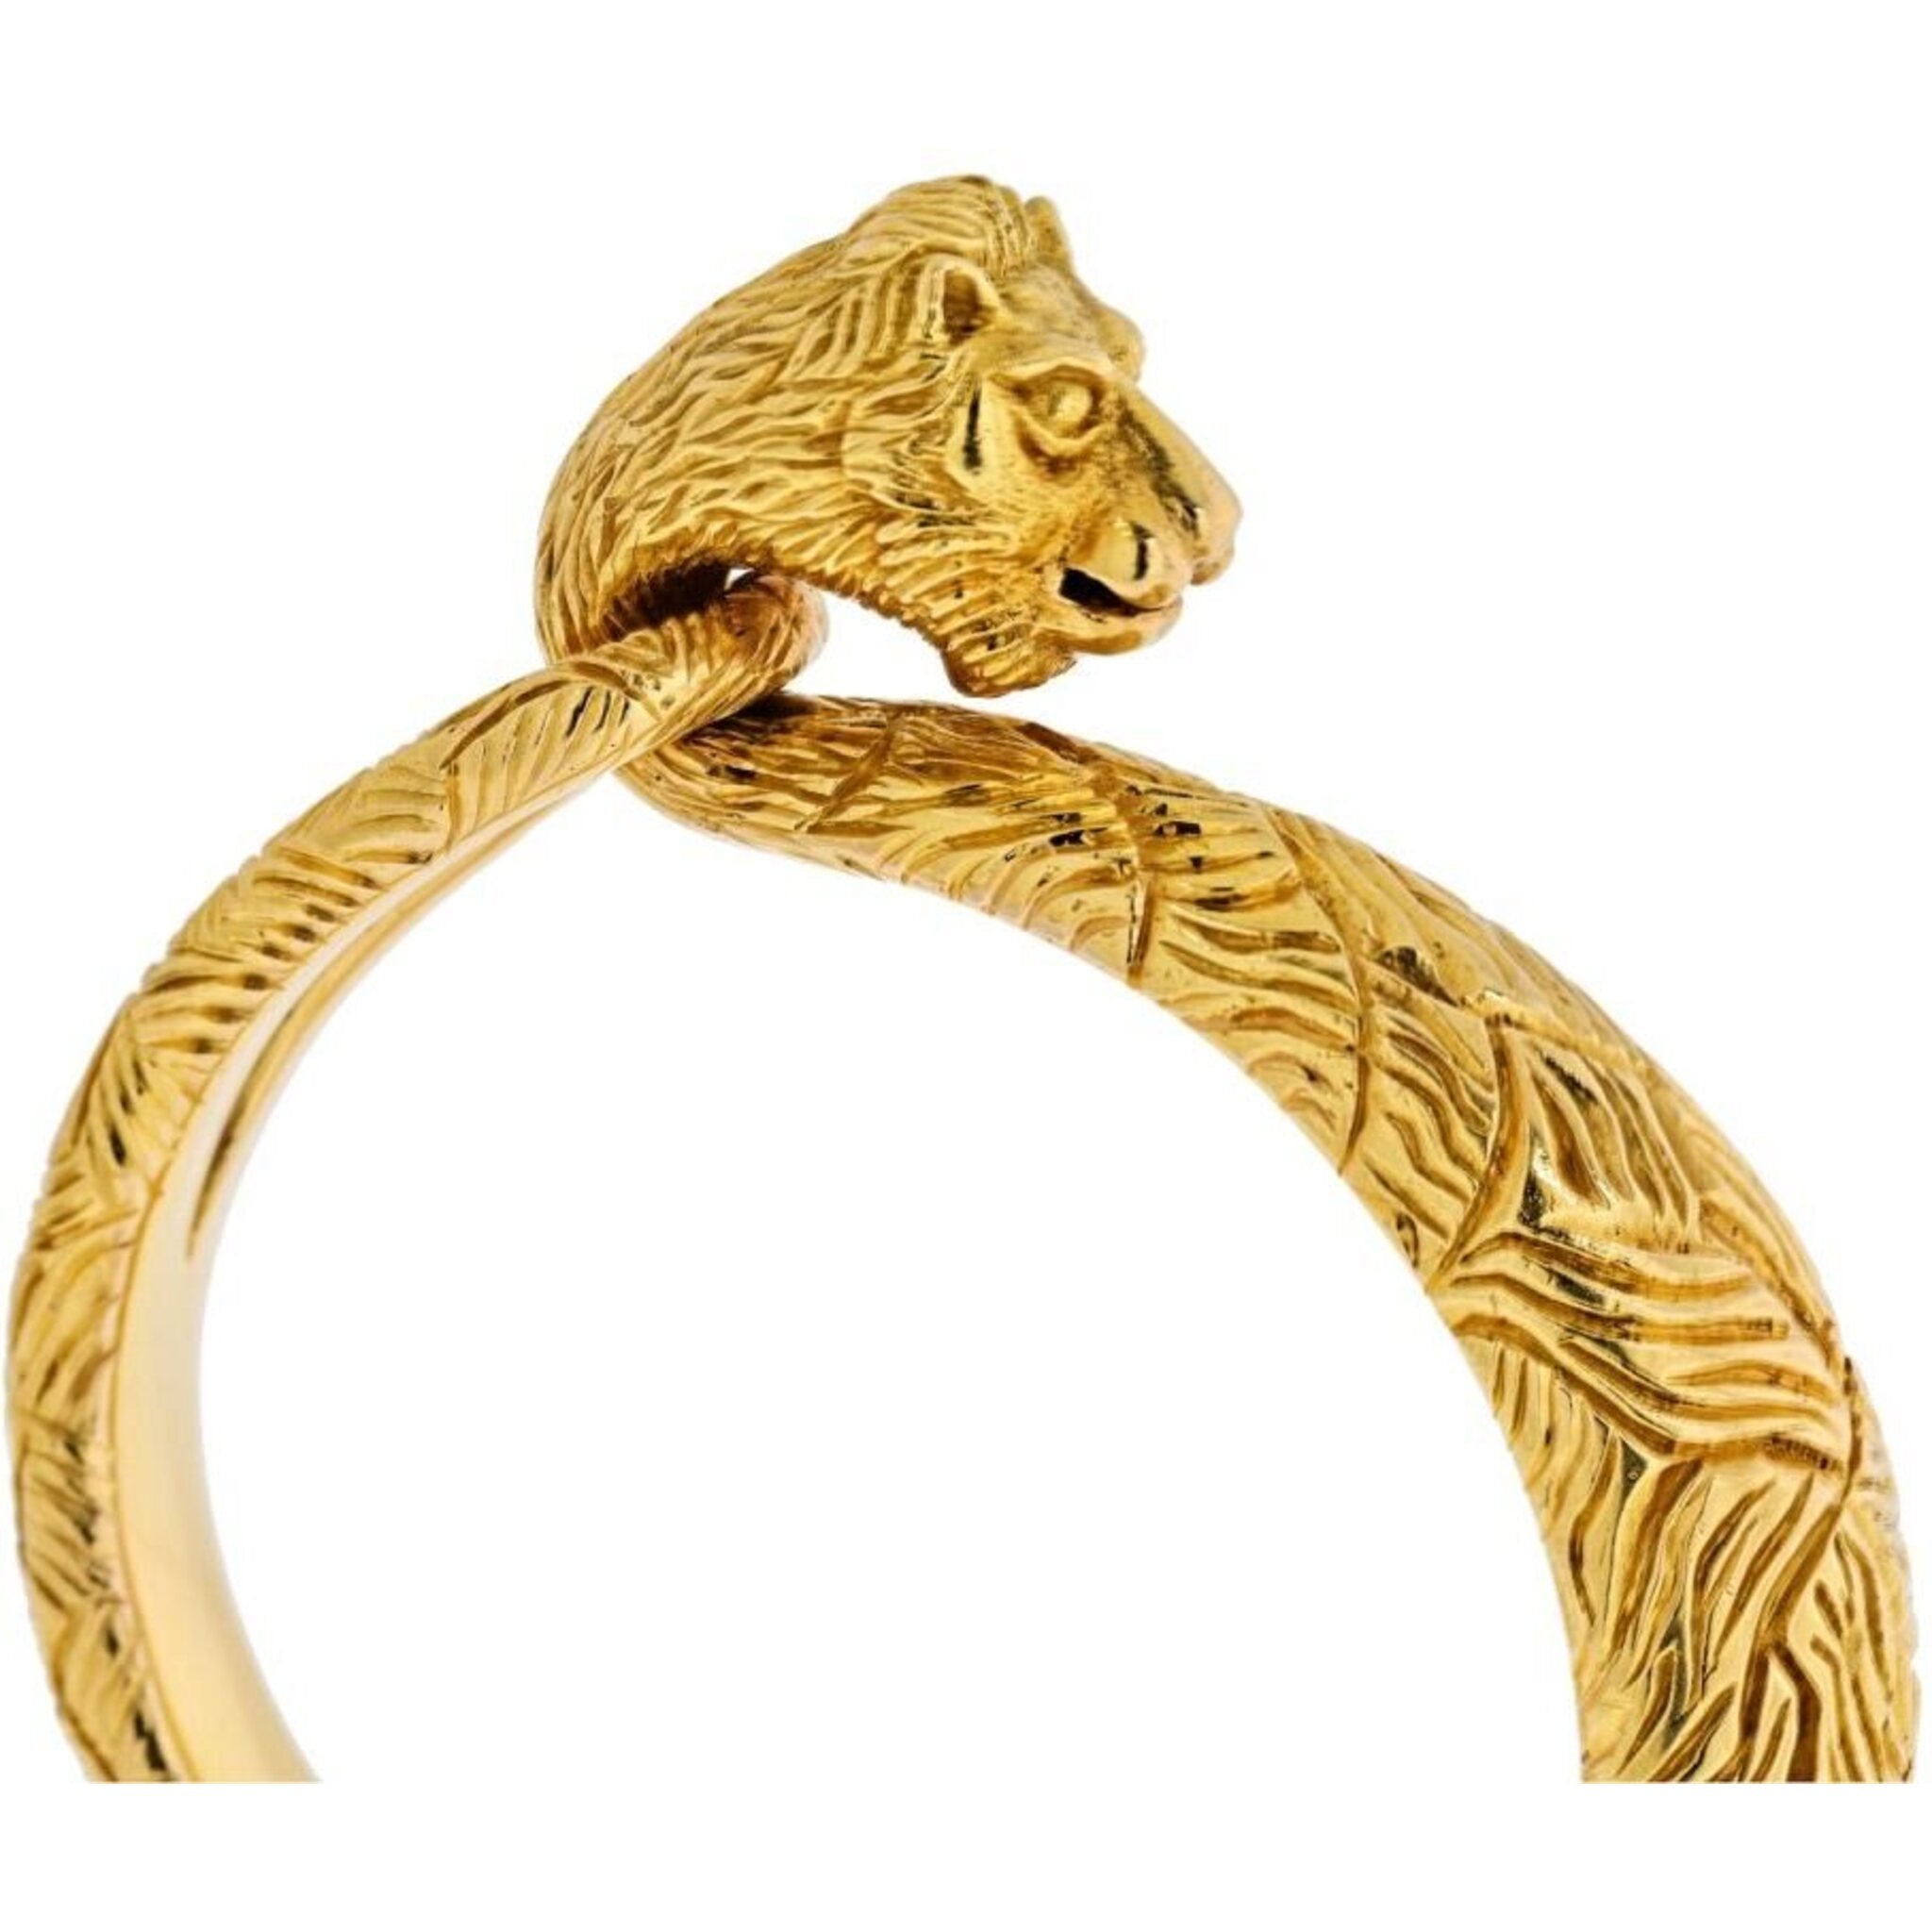 Full Body Lion Link Bracelet in 14kt Gold Vermeil With 7 Lions – Chris  Chaney